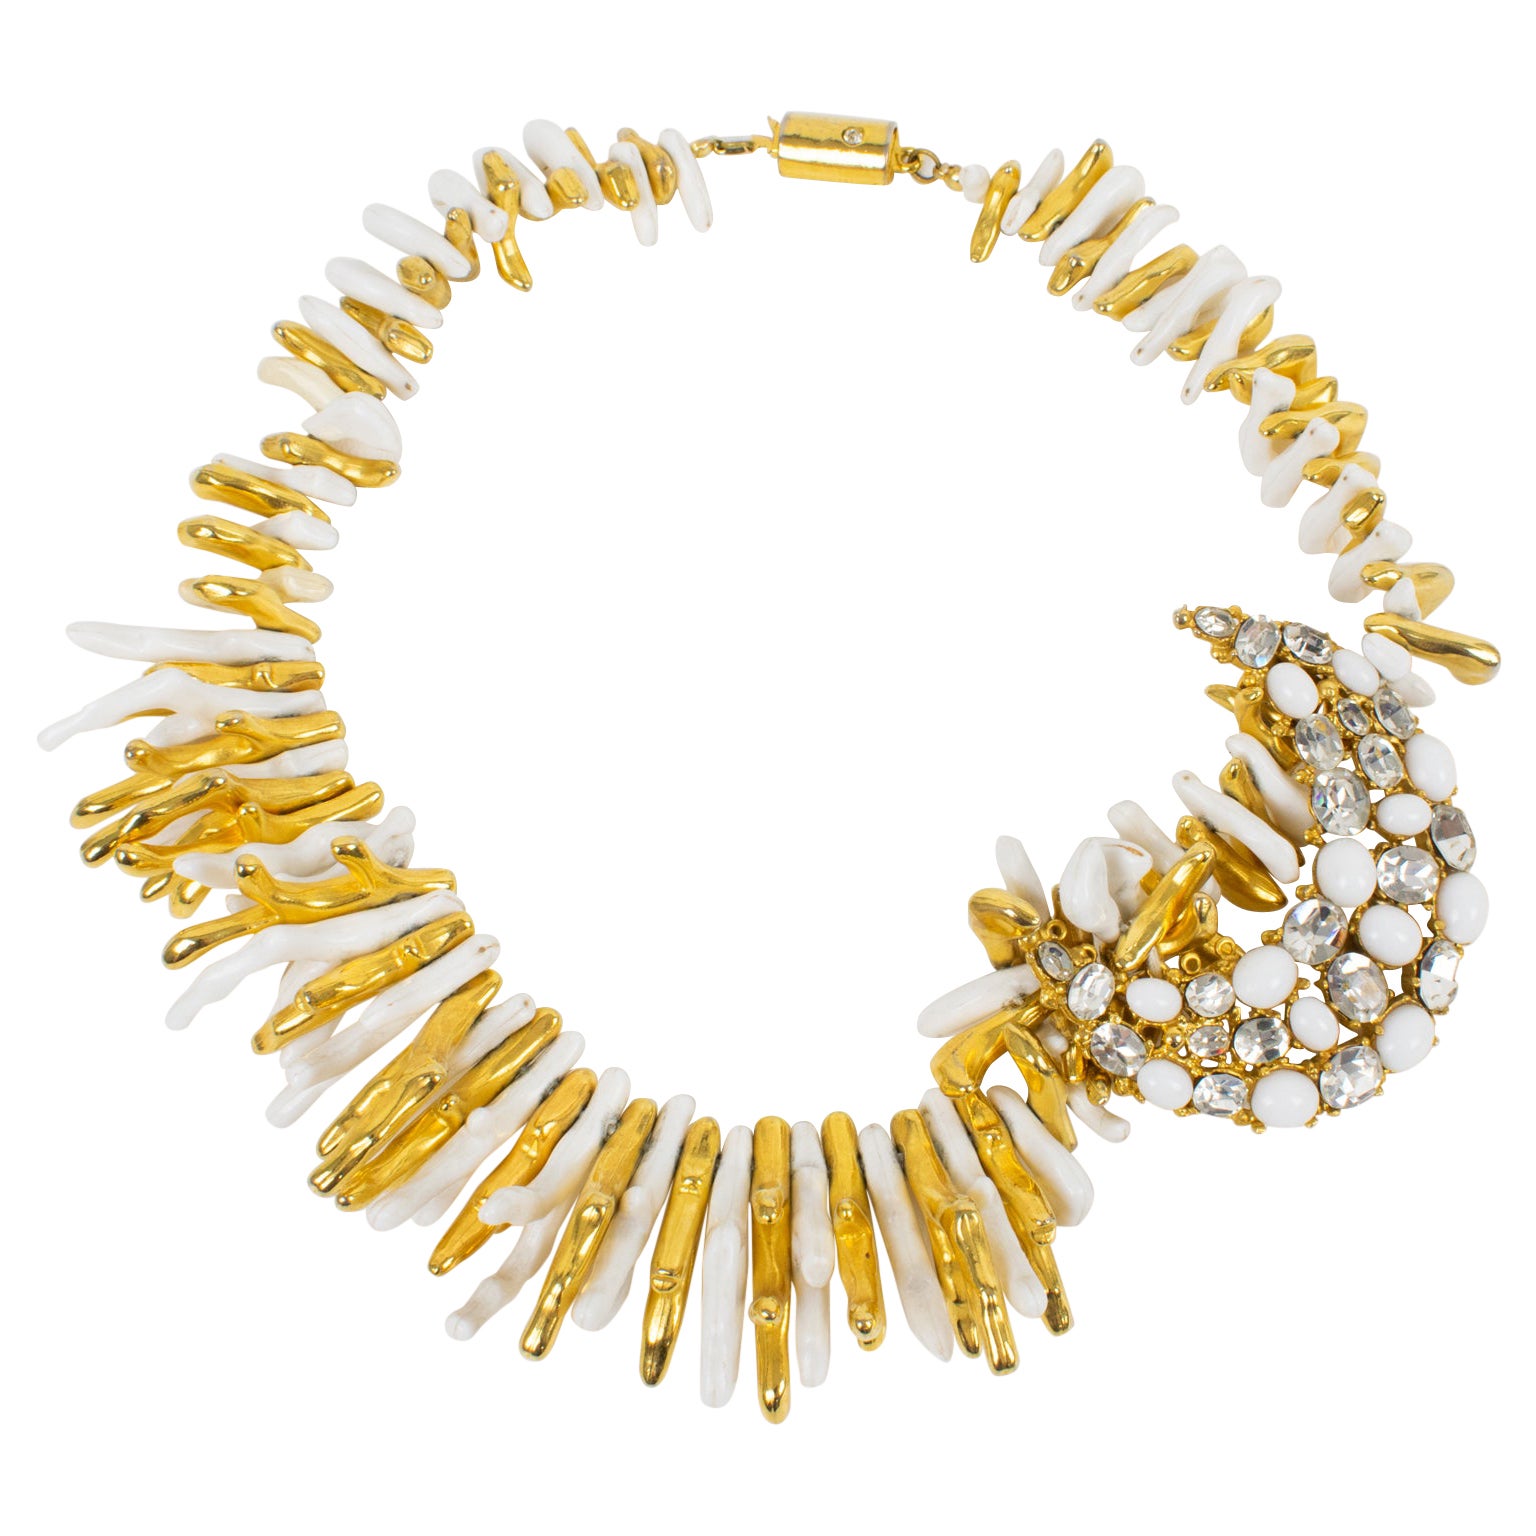 Ugo Correani White and Gilded Faux-Coral Necklace with Jeweled Pendant For Sale